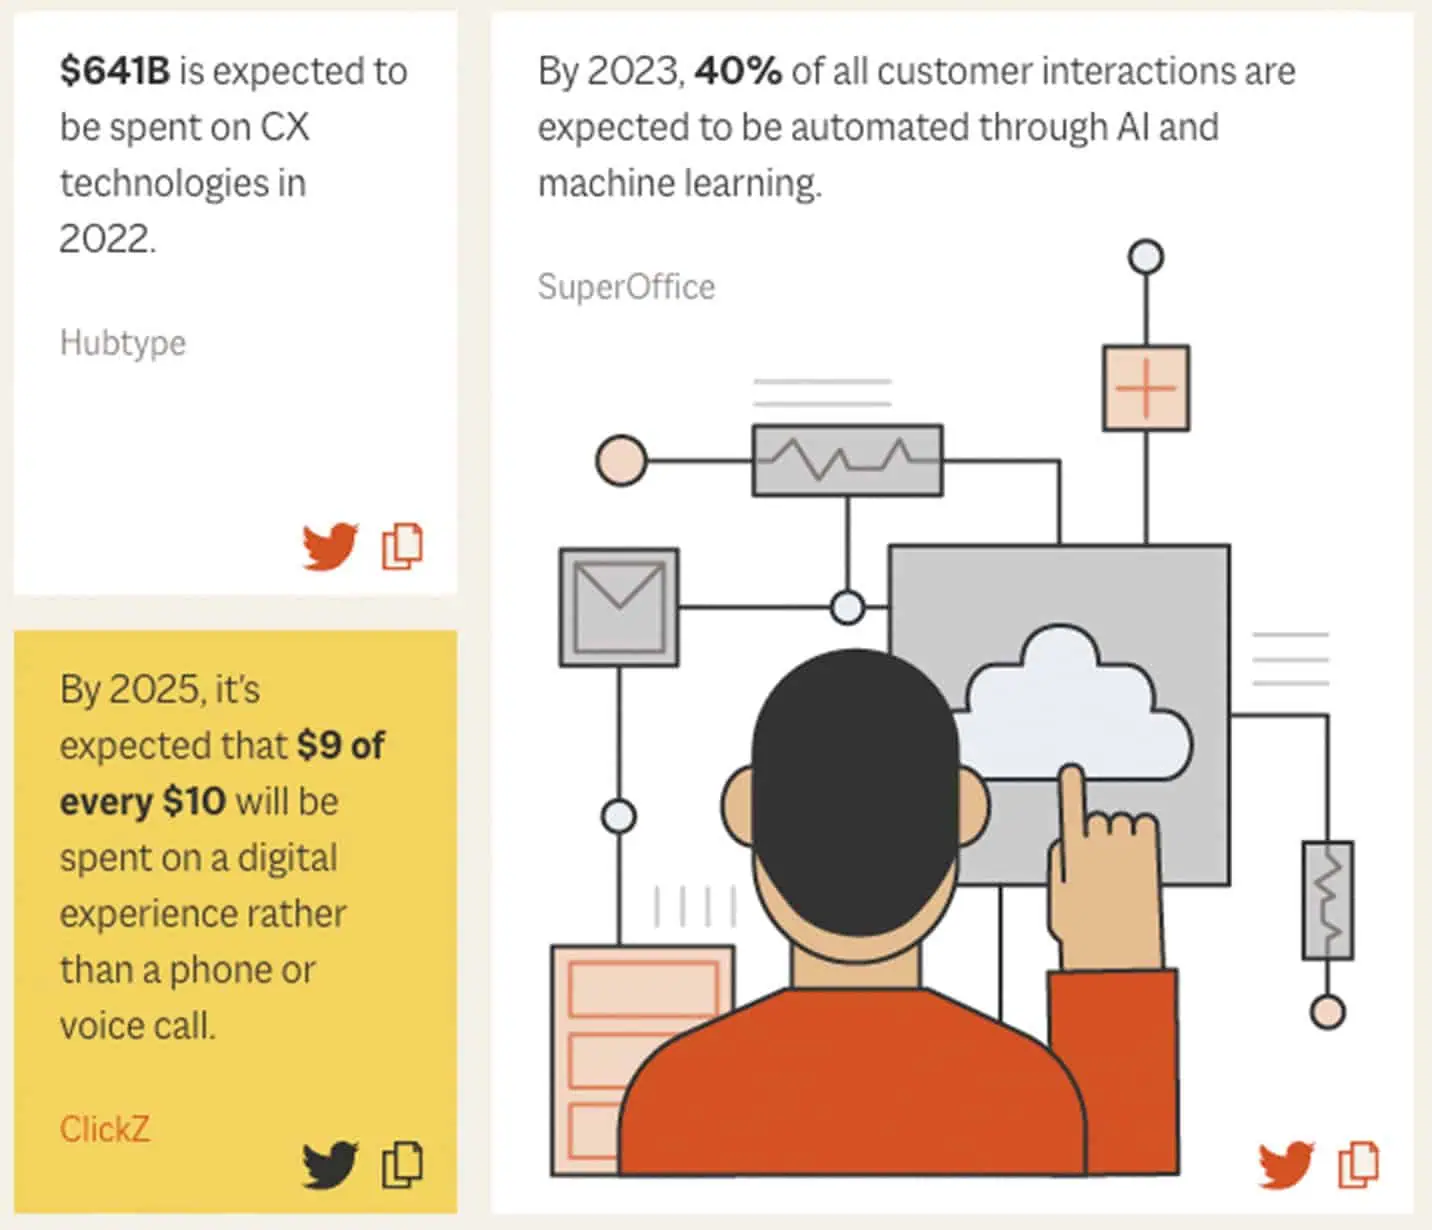 Customer experience statistics graphic from Smith.ai